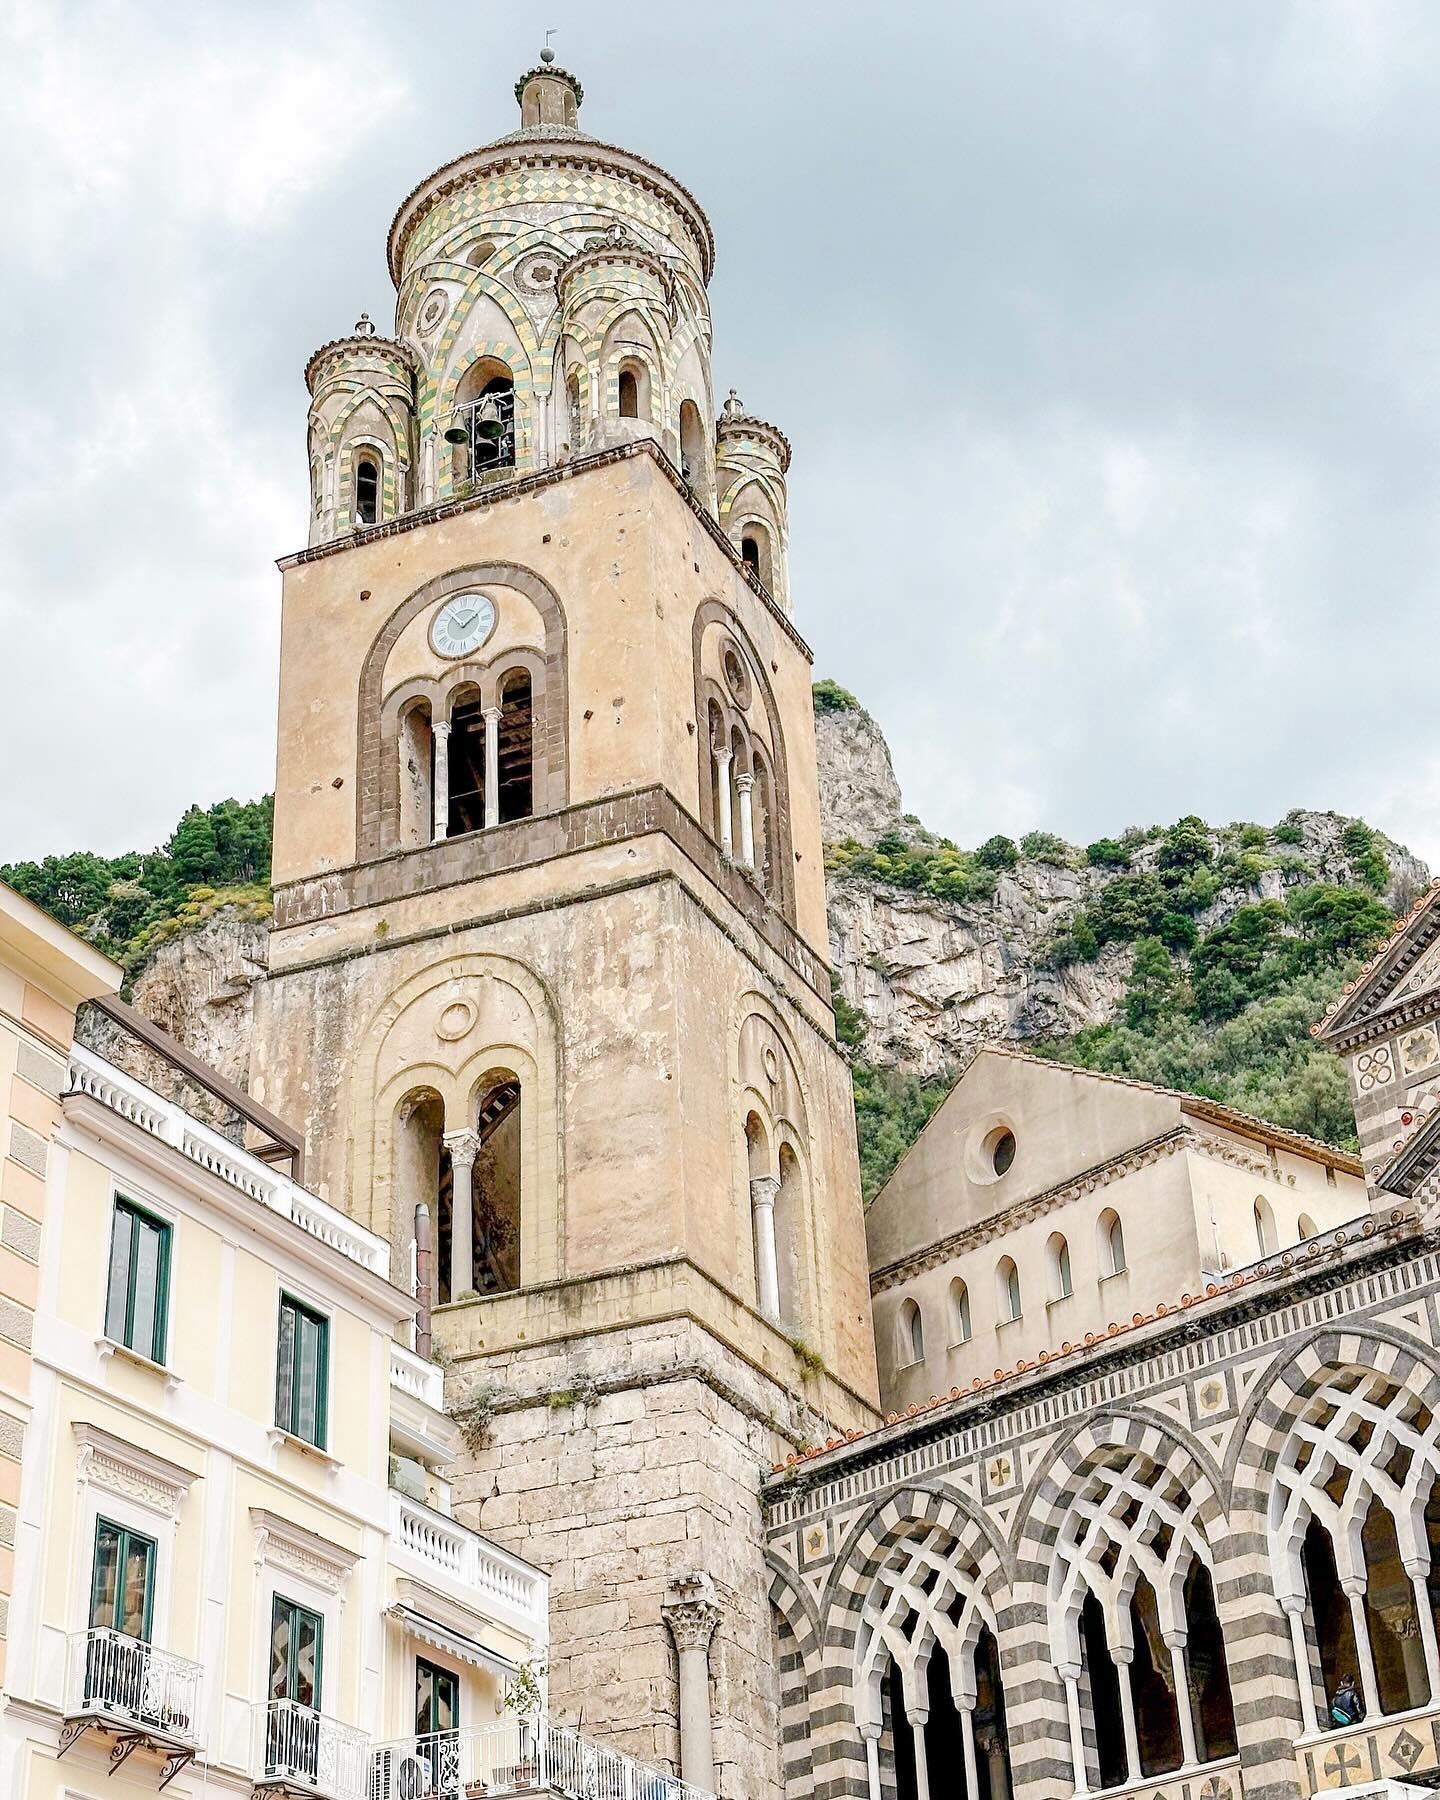 Venturing into the Duomo di Amalfi, an architectural marvel dating back to the 9th century, adorned with intricate Byzantine mosaics and stunning Arab-Norman influences. Located in the heart of Amalfi town, it stands as a testament to the region's hi